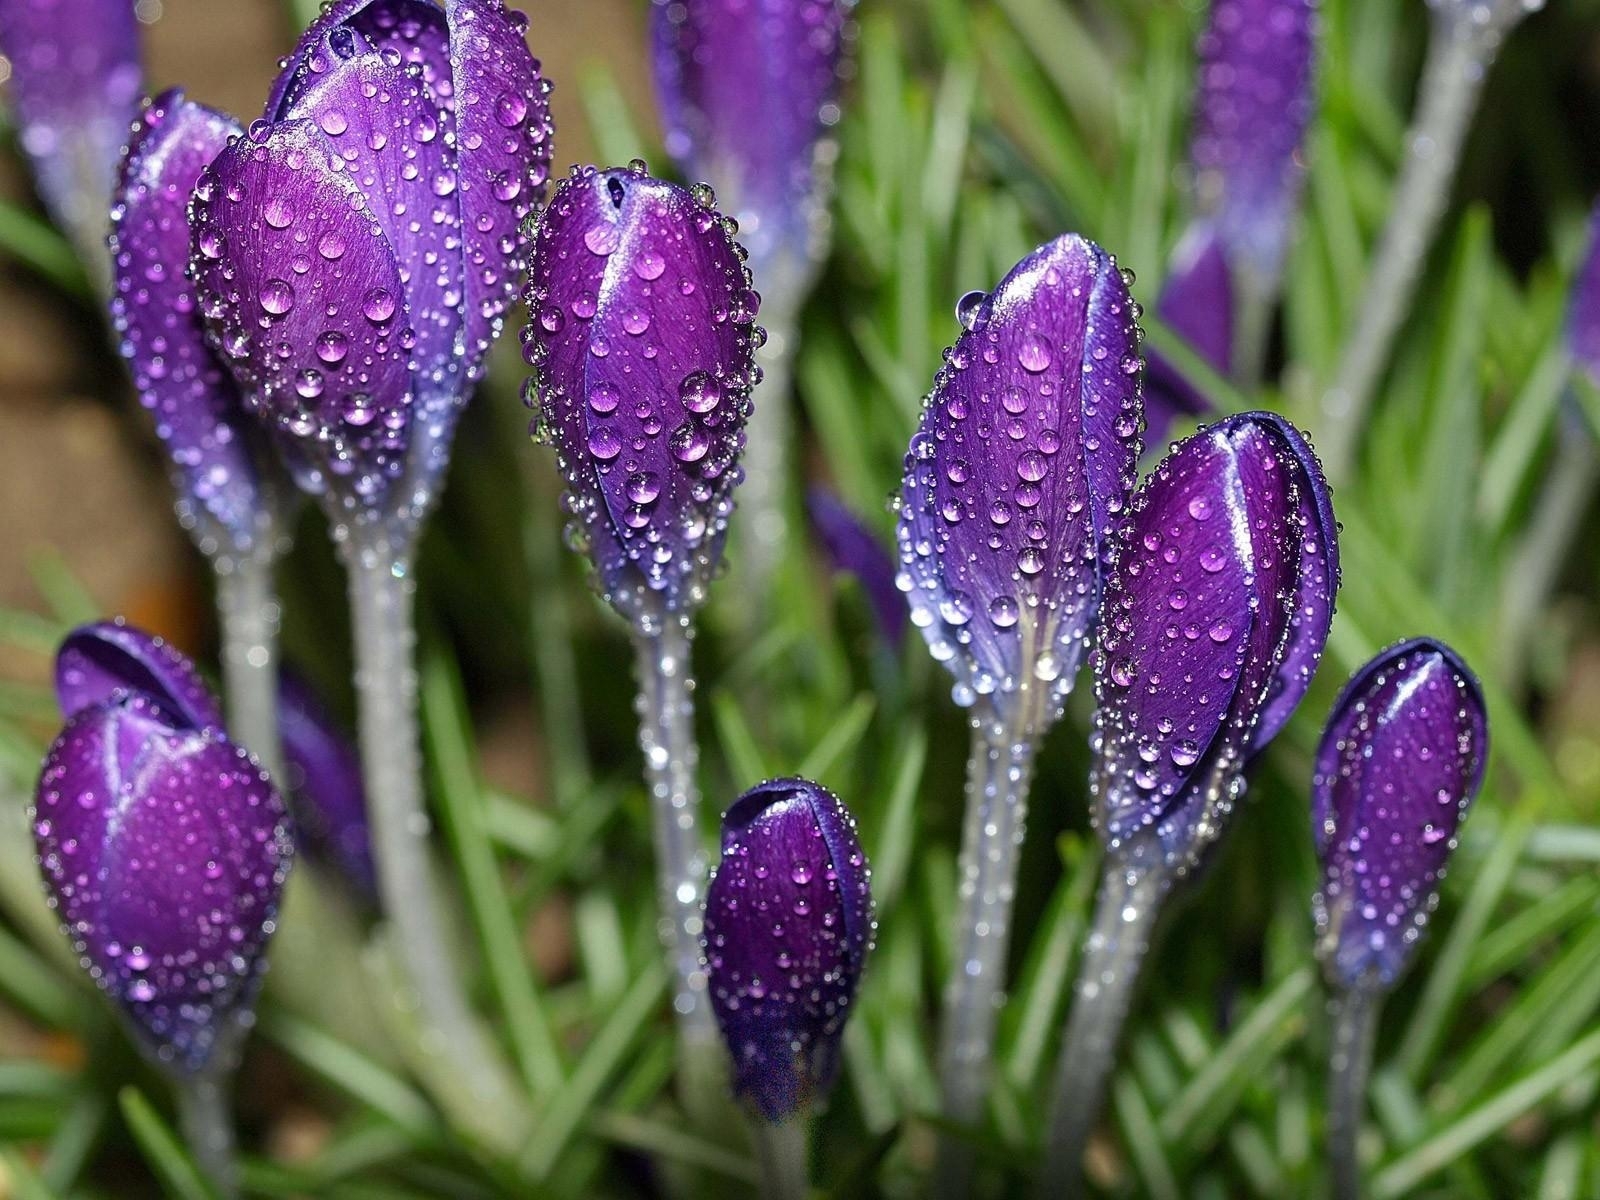  Crocus HD Android Wallpapers